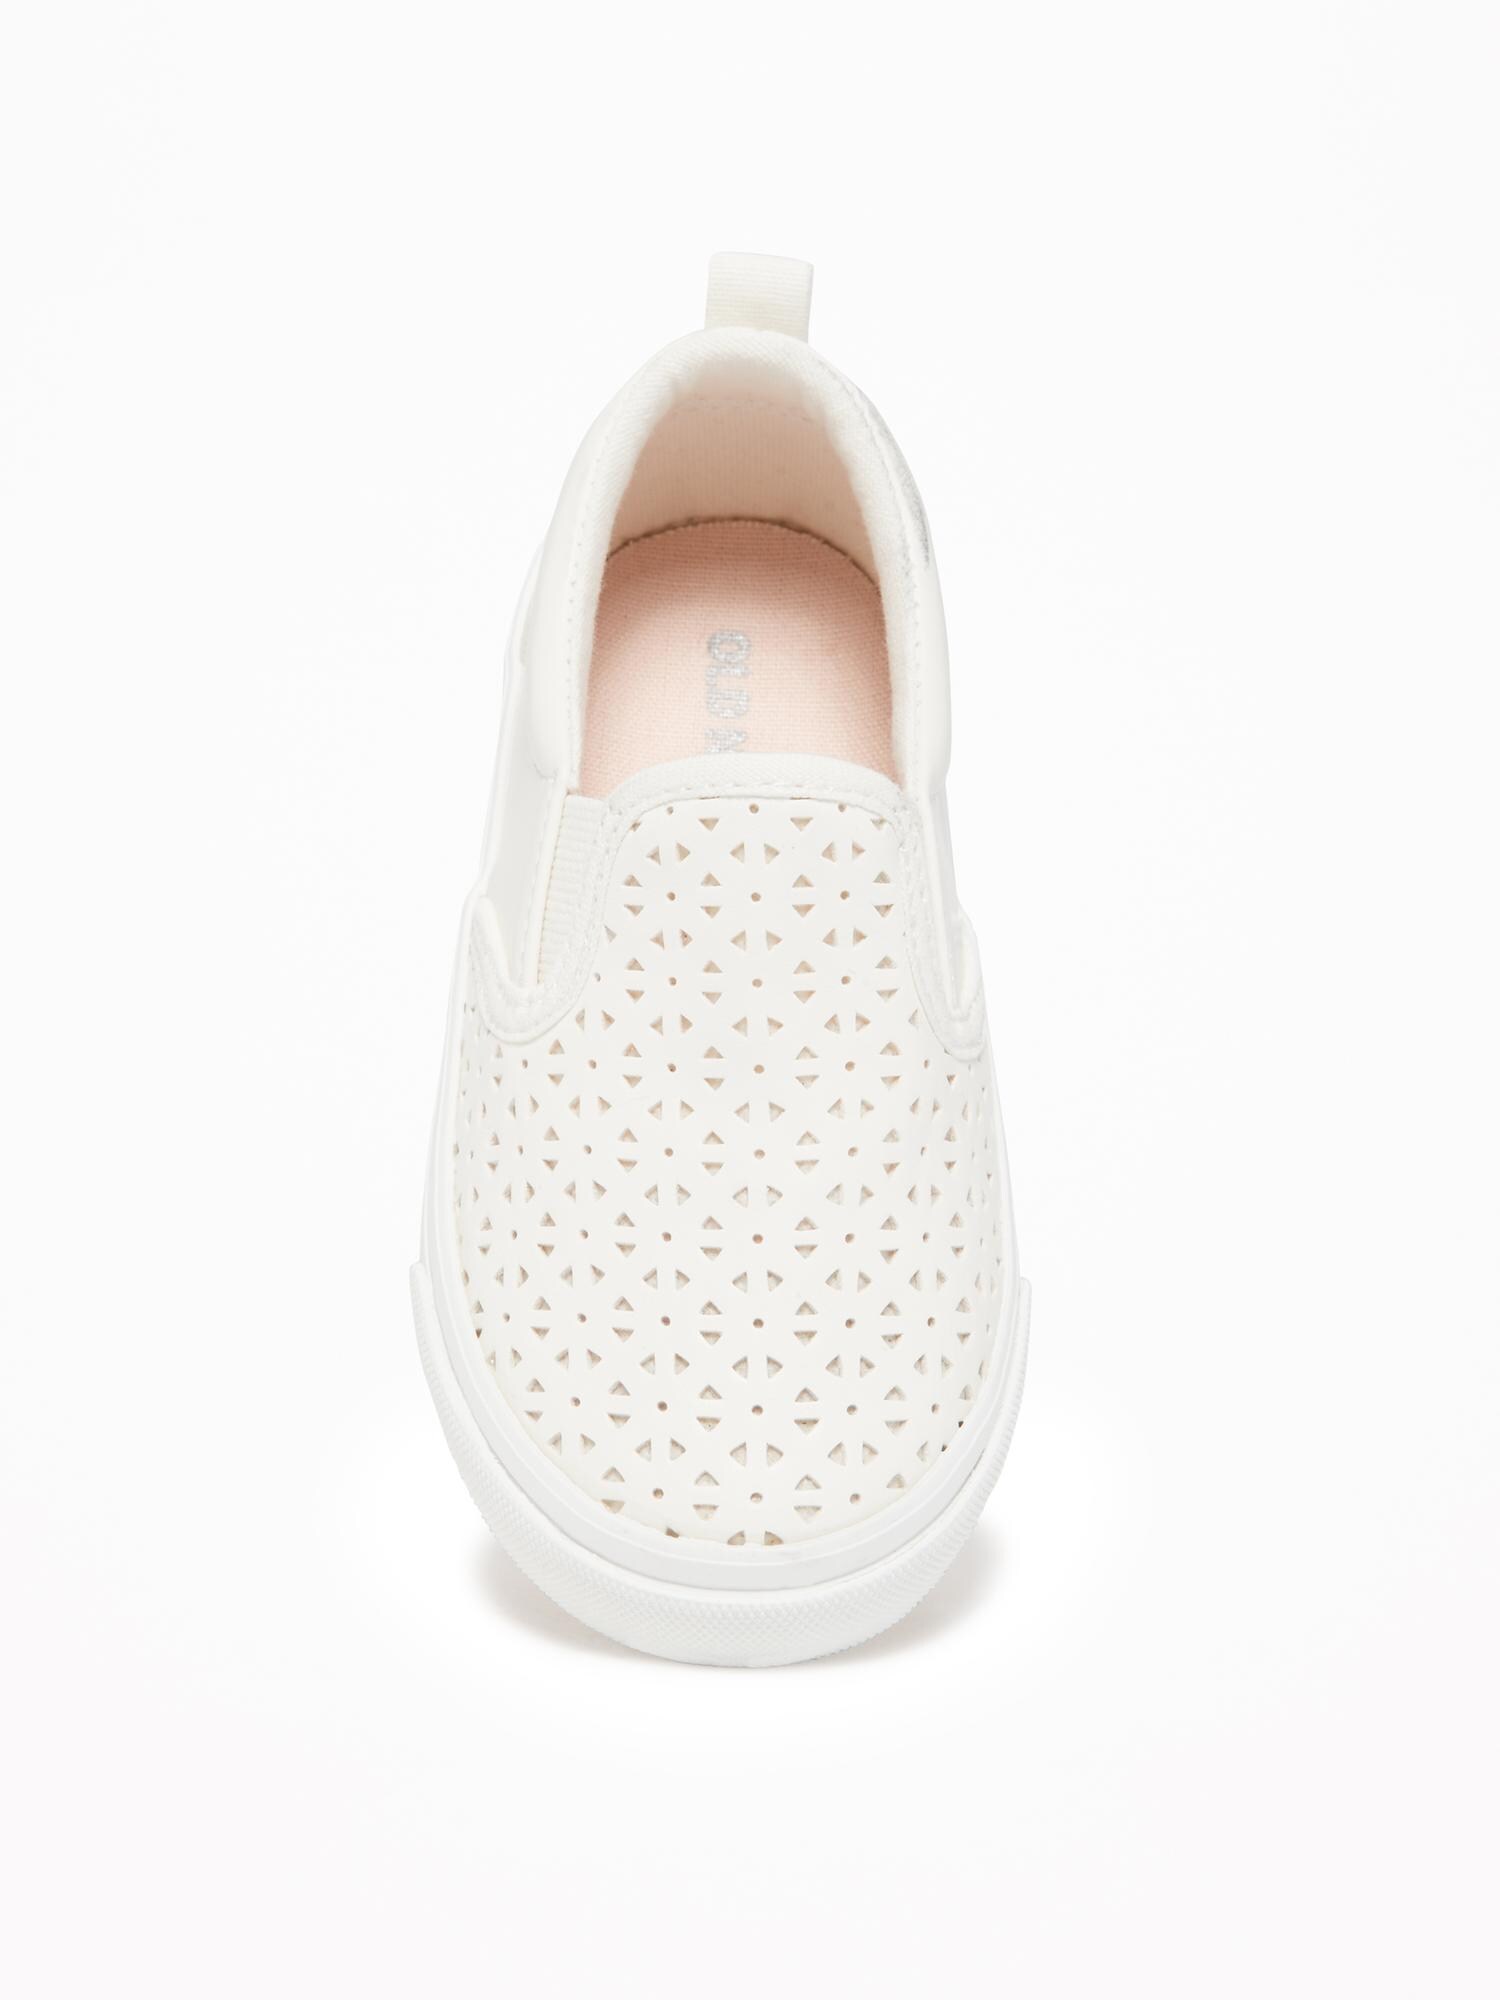 Perforated Slip-Ons For Toddler Girls | Old Navy